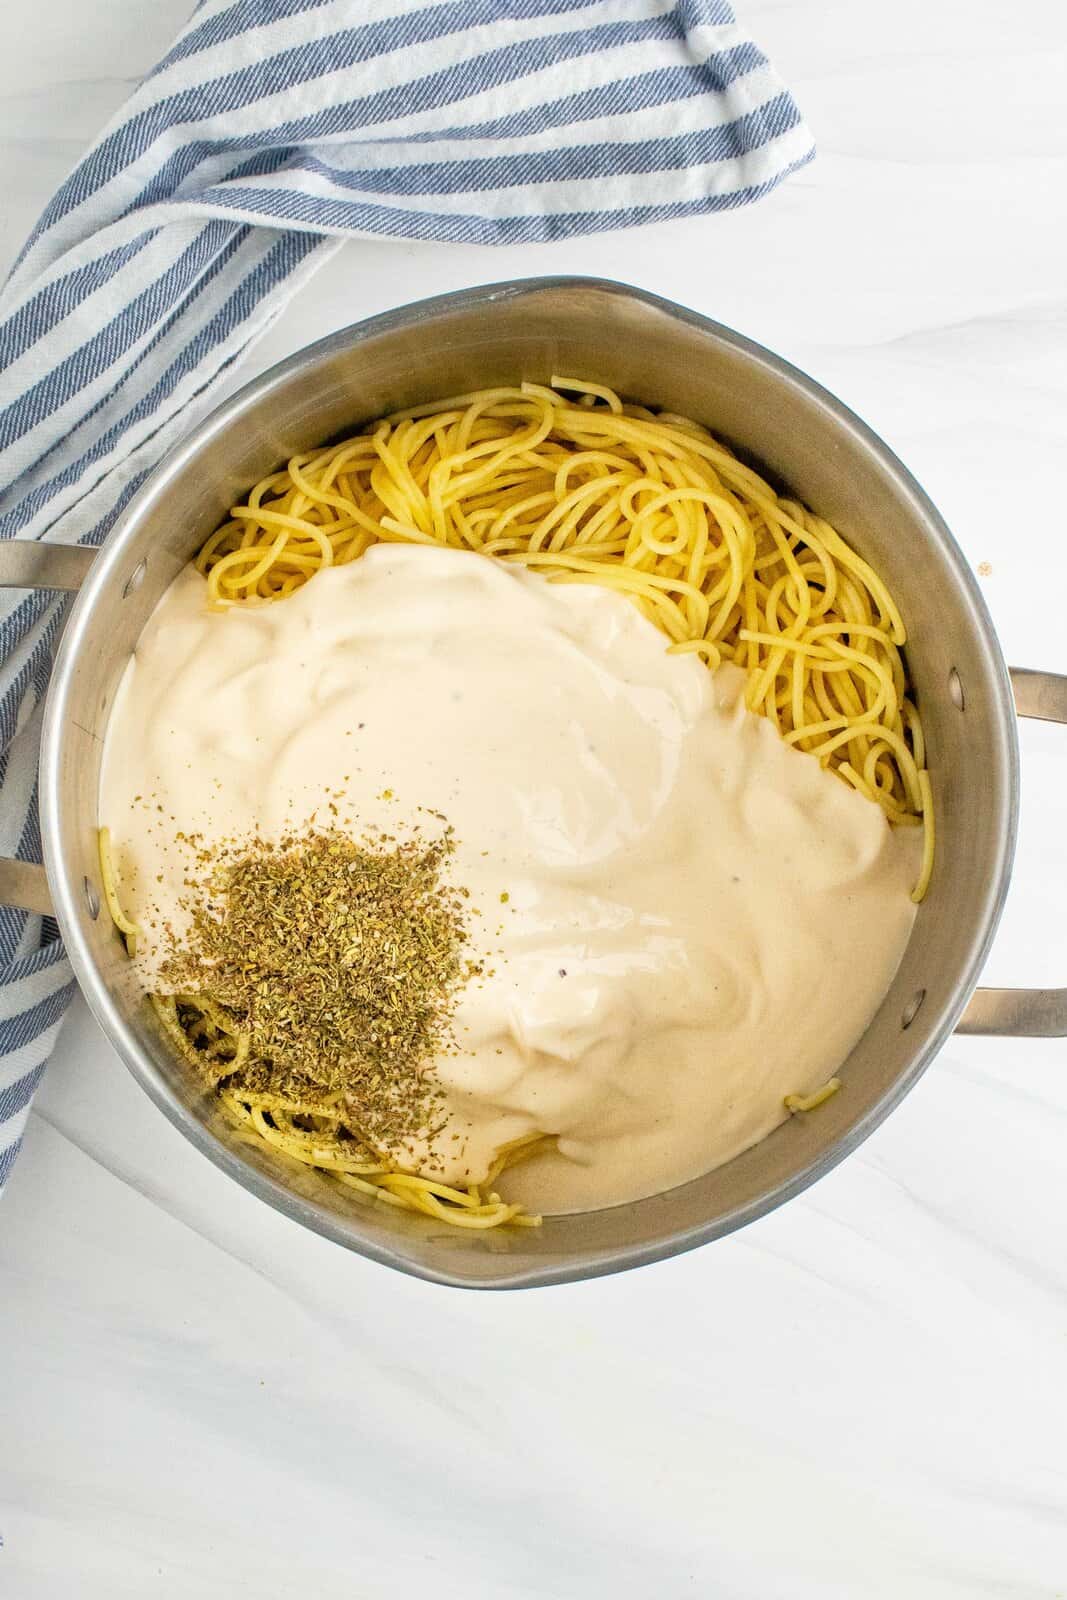 Alfredo sauce and Italian seasoning stirred together with cooked spaghetti noodles in a large stock pot.